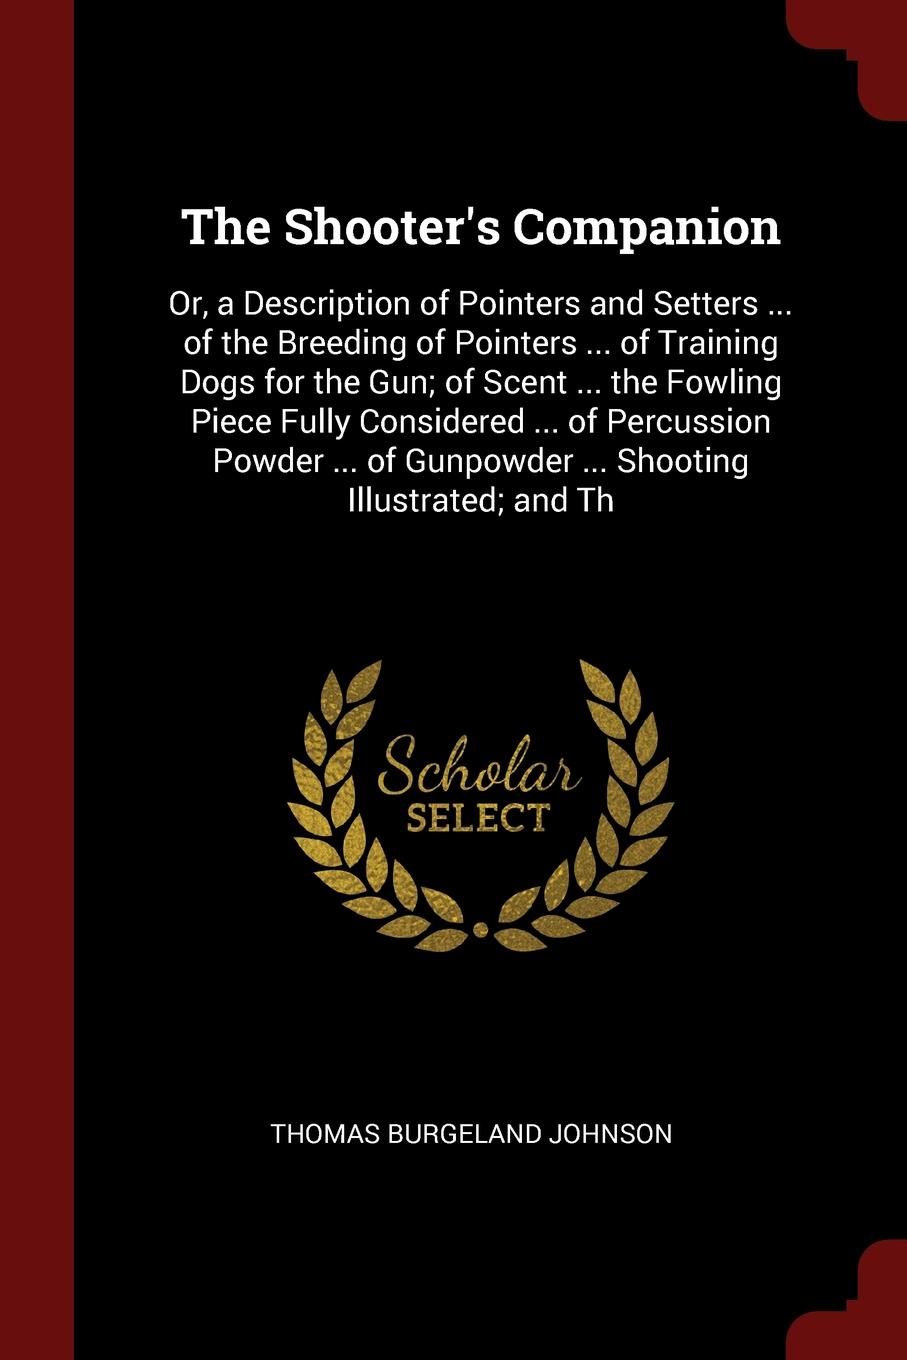 The Shooter`s Companion. Or, a Description of Pointers and Setters ... of the Breeding of Pointers ... of Training Dogs for the Gun; of Scent ... the Fowling Piece Fully Considered ... of Percussion Powder ... of Gunpowder ... Shooting Illustrated...